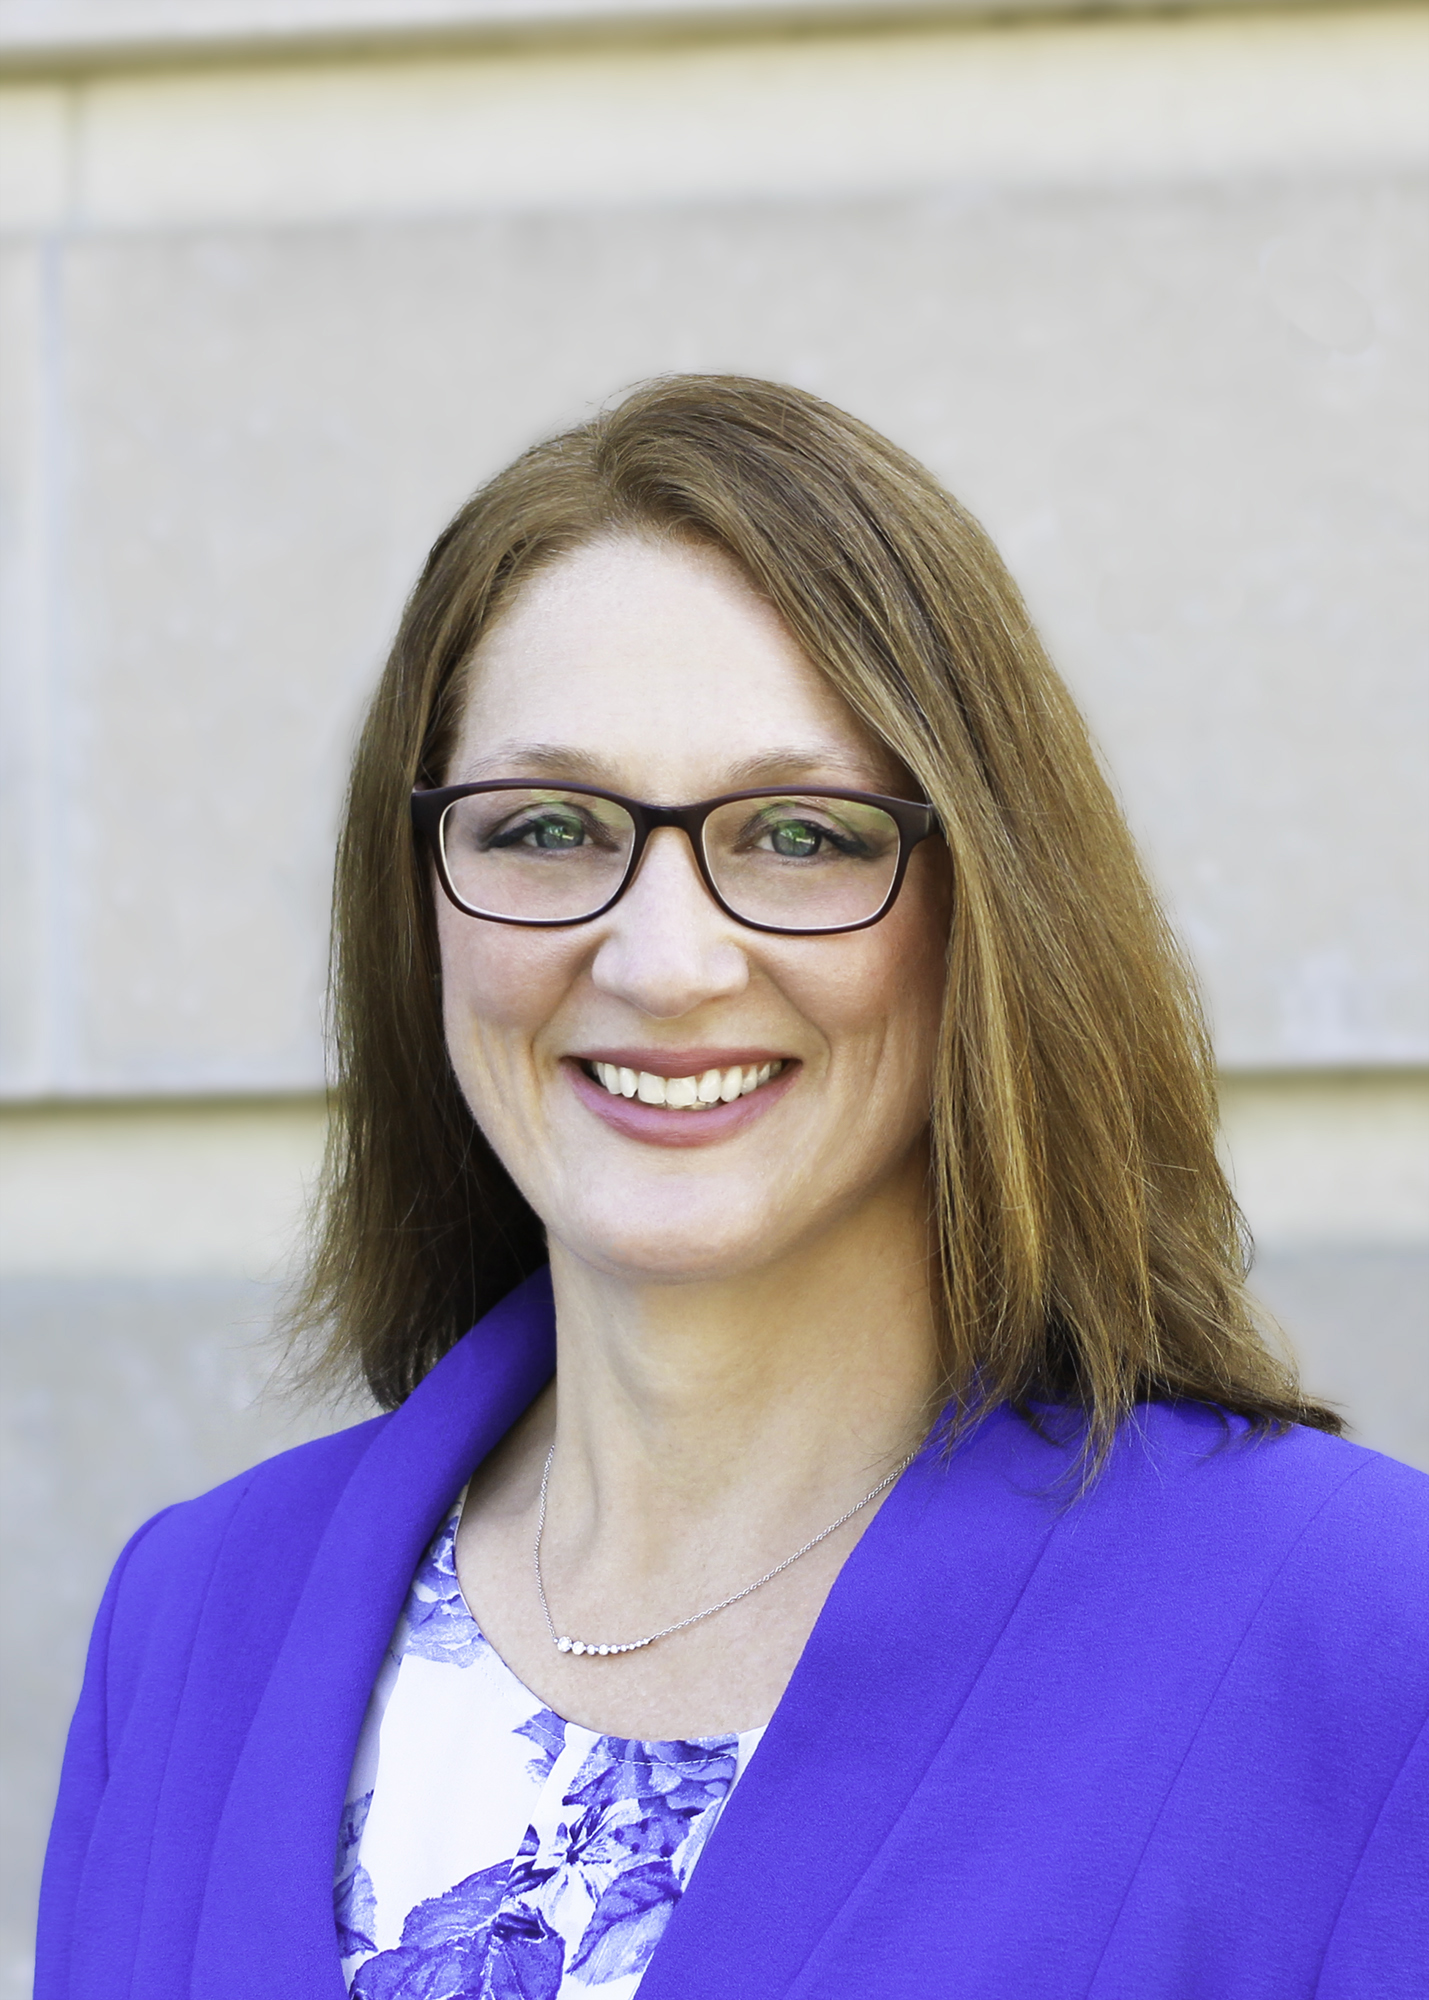 An image of Michelle Bradley in a bright blue sport coat. She is wearing glasses.